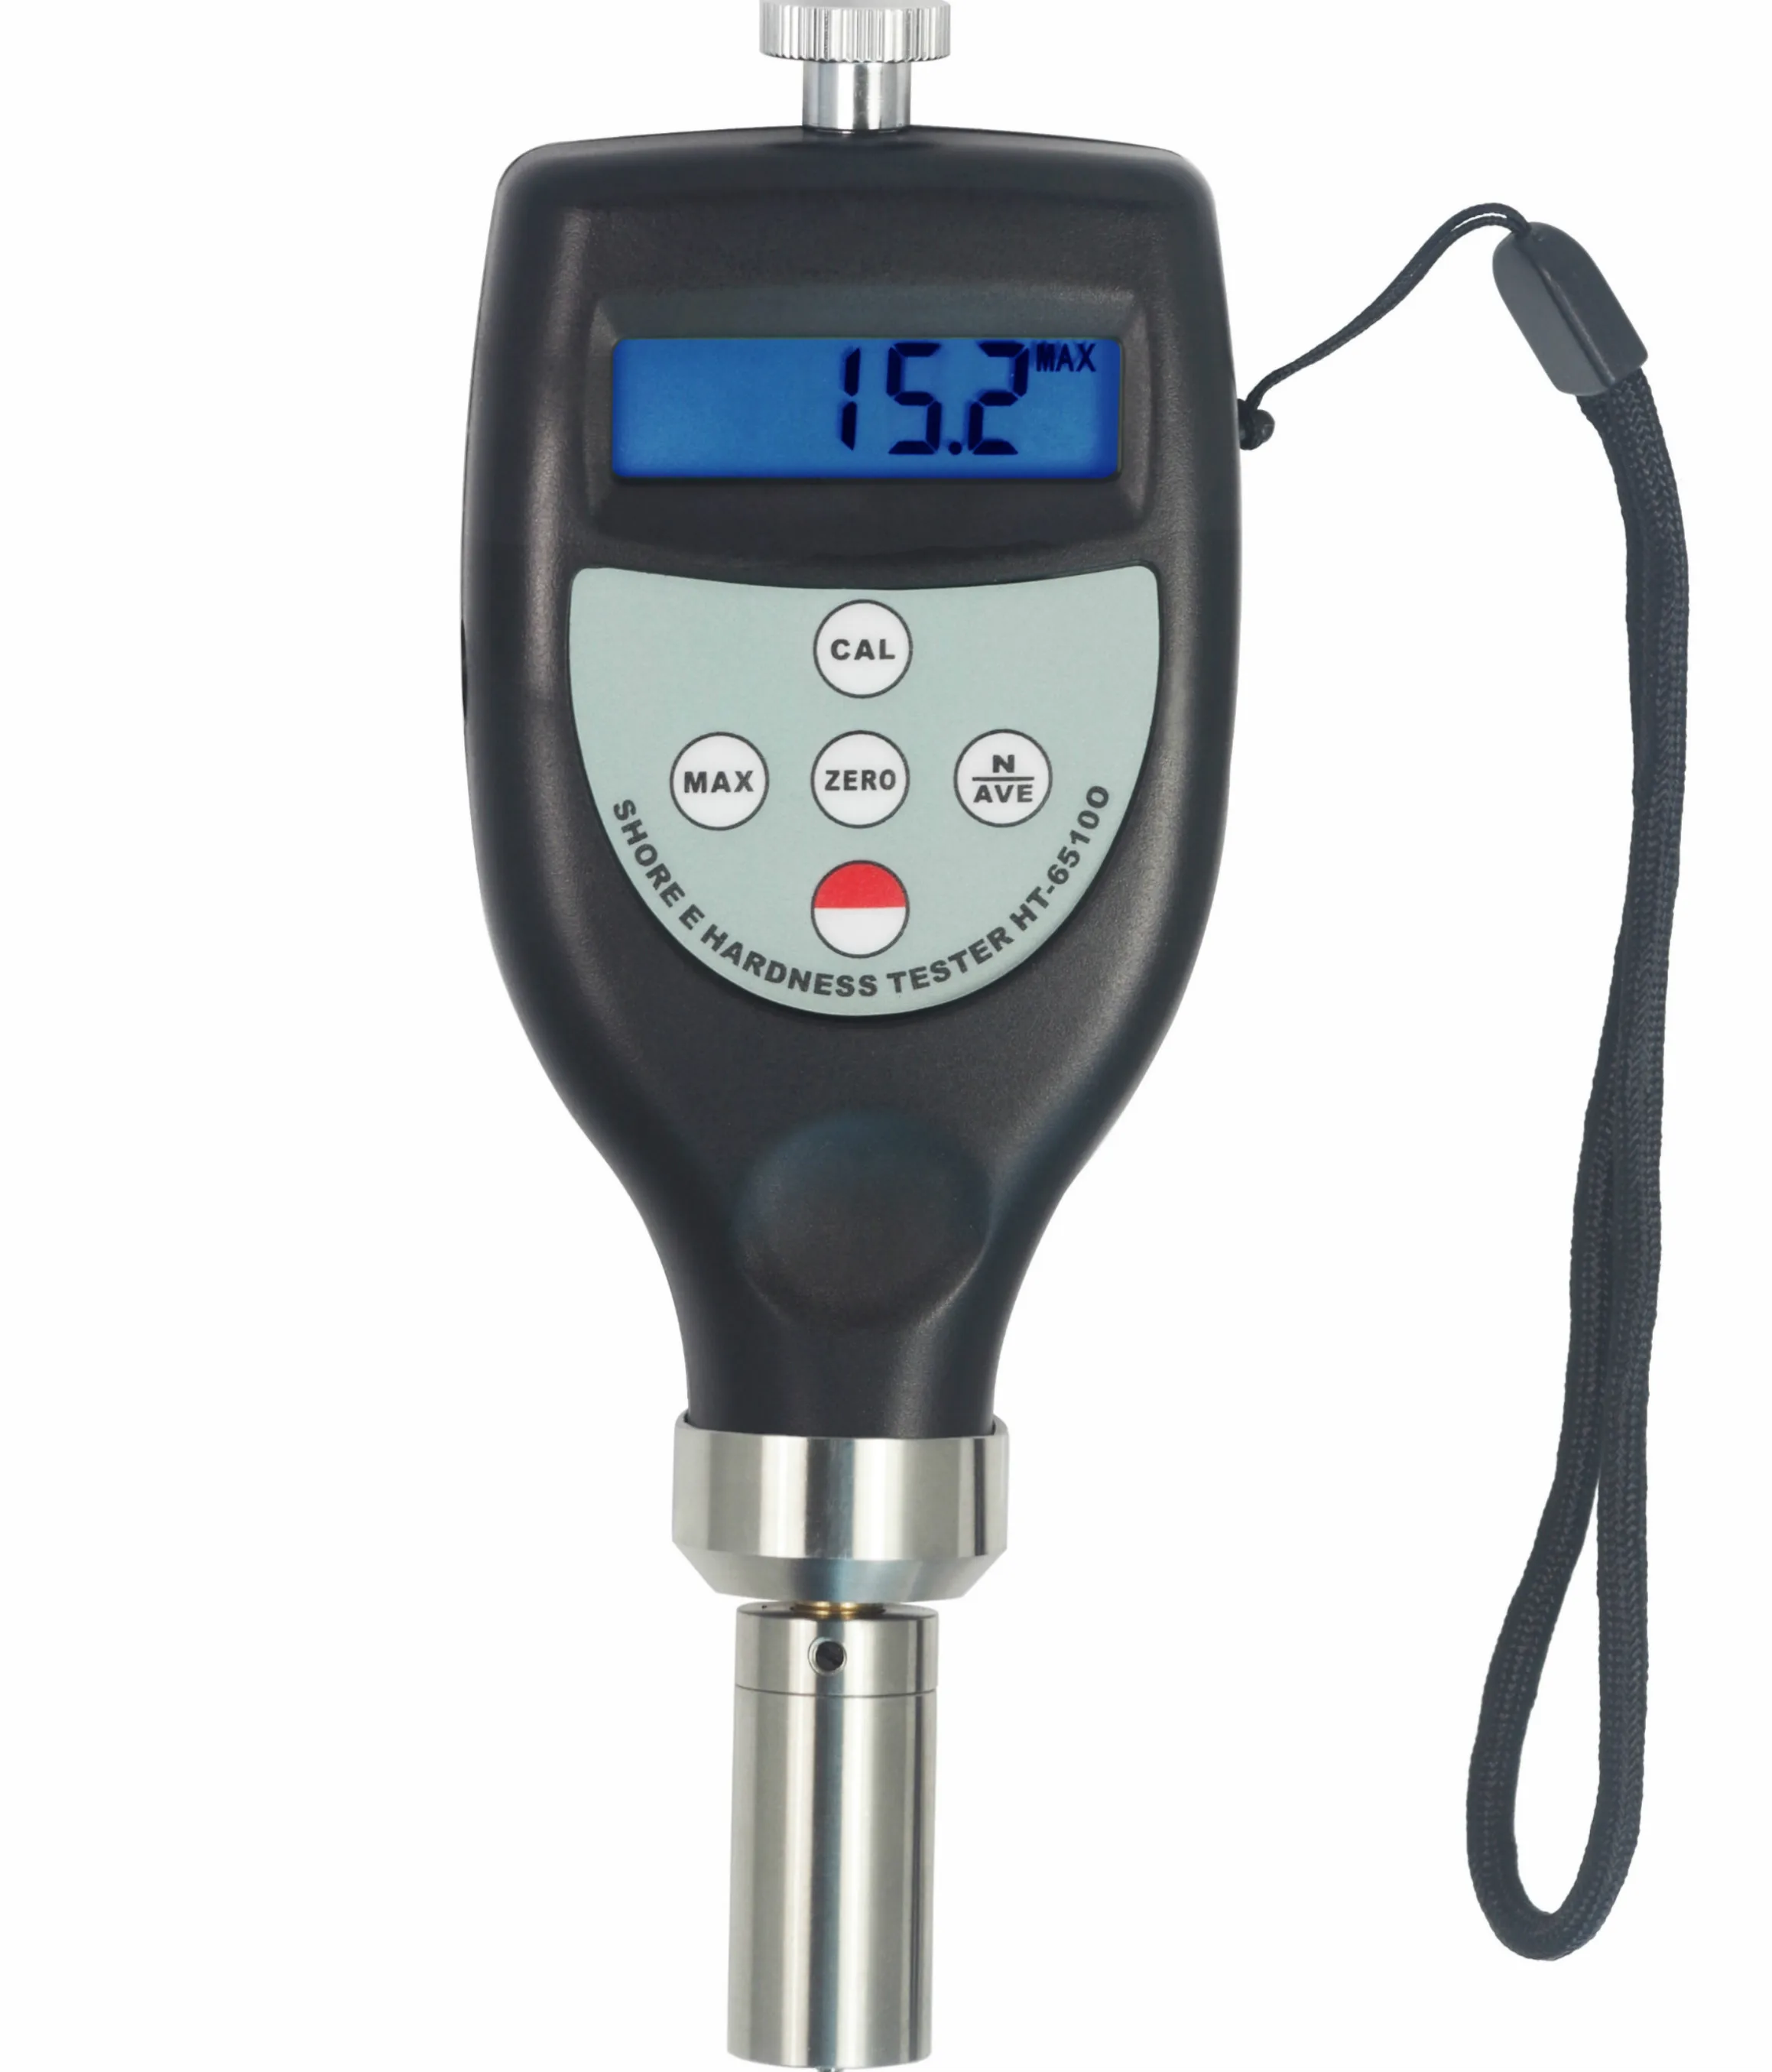 Digital Shore A Durometer,Rubber Hardness Tester,New zq 